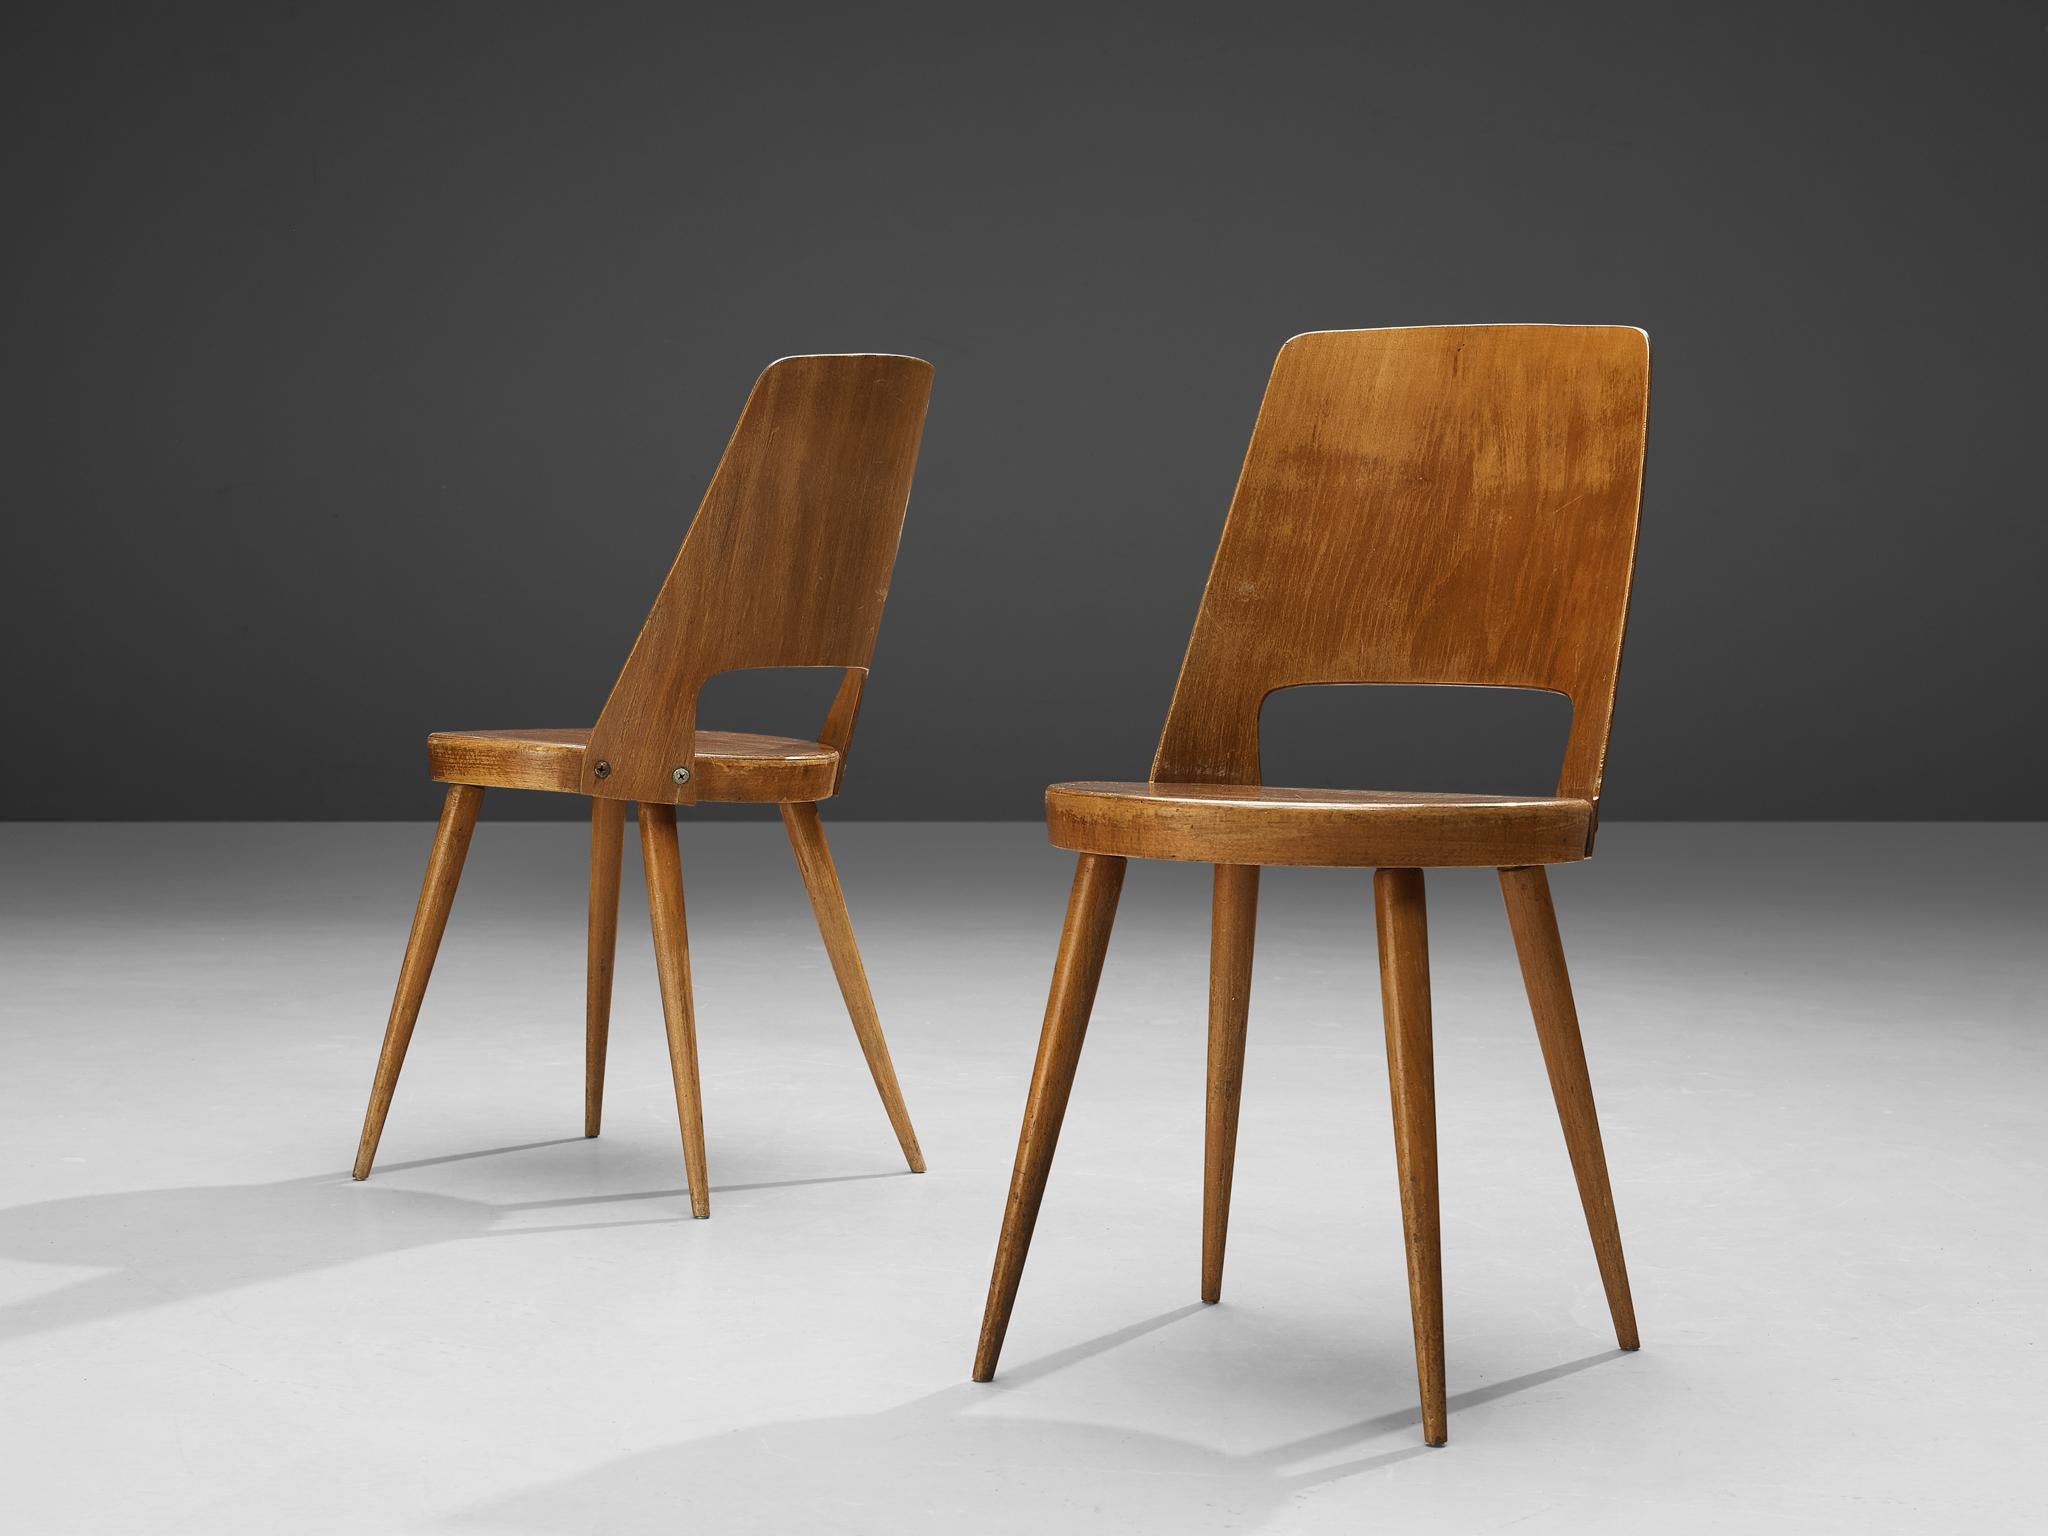 Jomaine Baumann, large set of 'Mondor' dining chairs, plywood, wood, France, 1960s

The ‘Mondor’ dining chair was manufactured by French furniture maker Jomaine Baumann. Characteristic for the ‘Mondor’ chair is the curved bentwood back with a